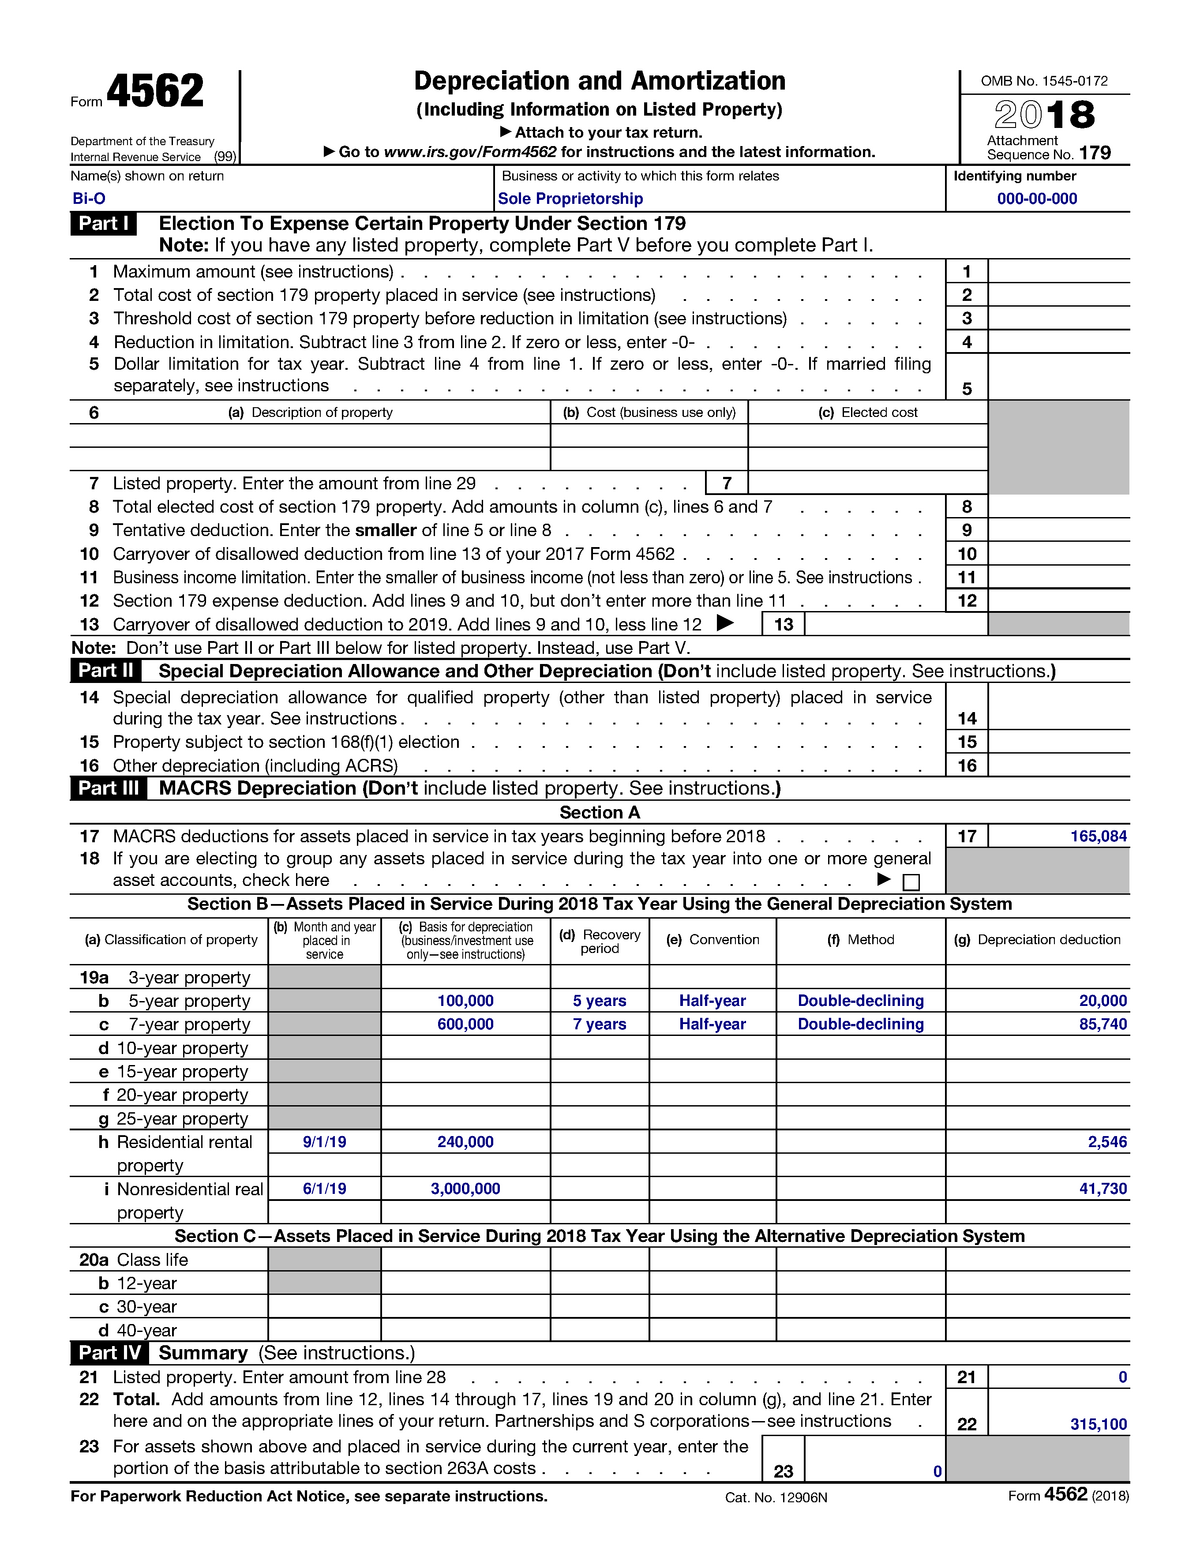 form-4562-final-this-document-has-the-filled-out-form-4562-for-the